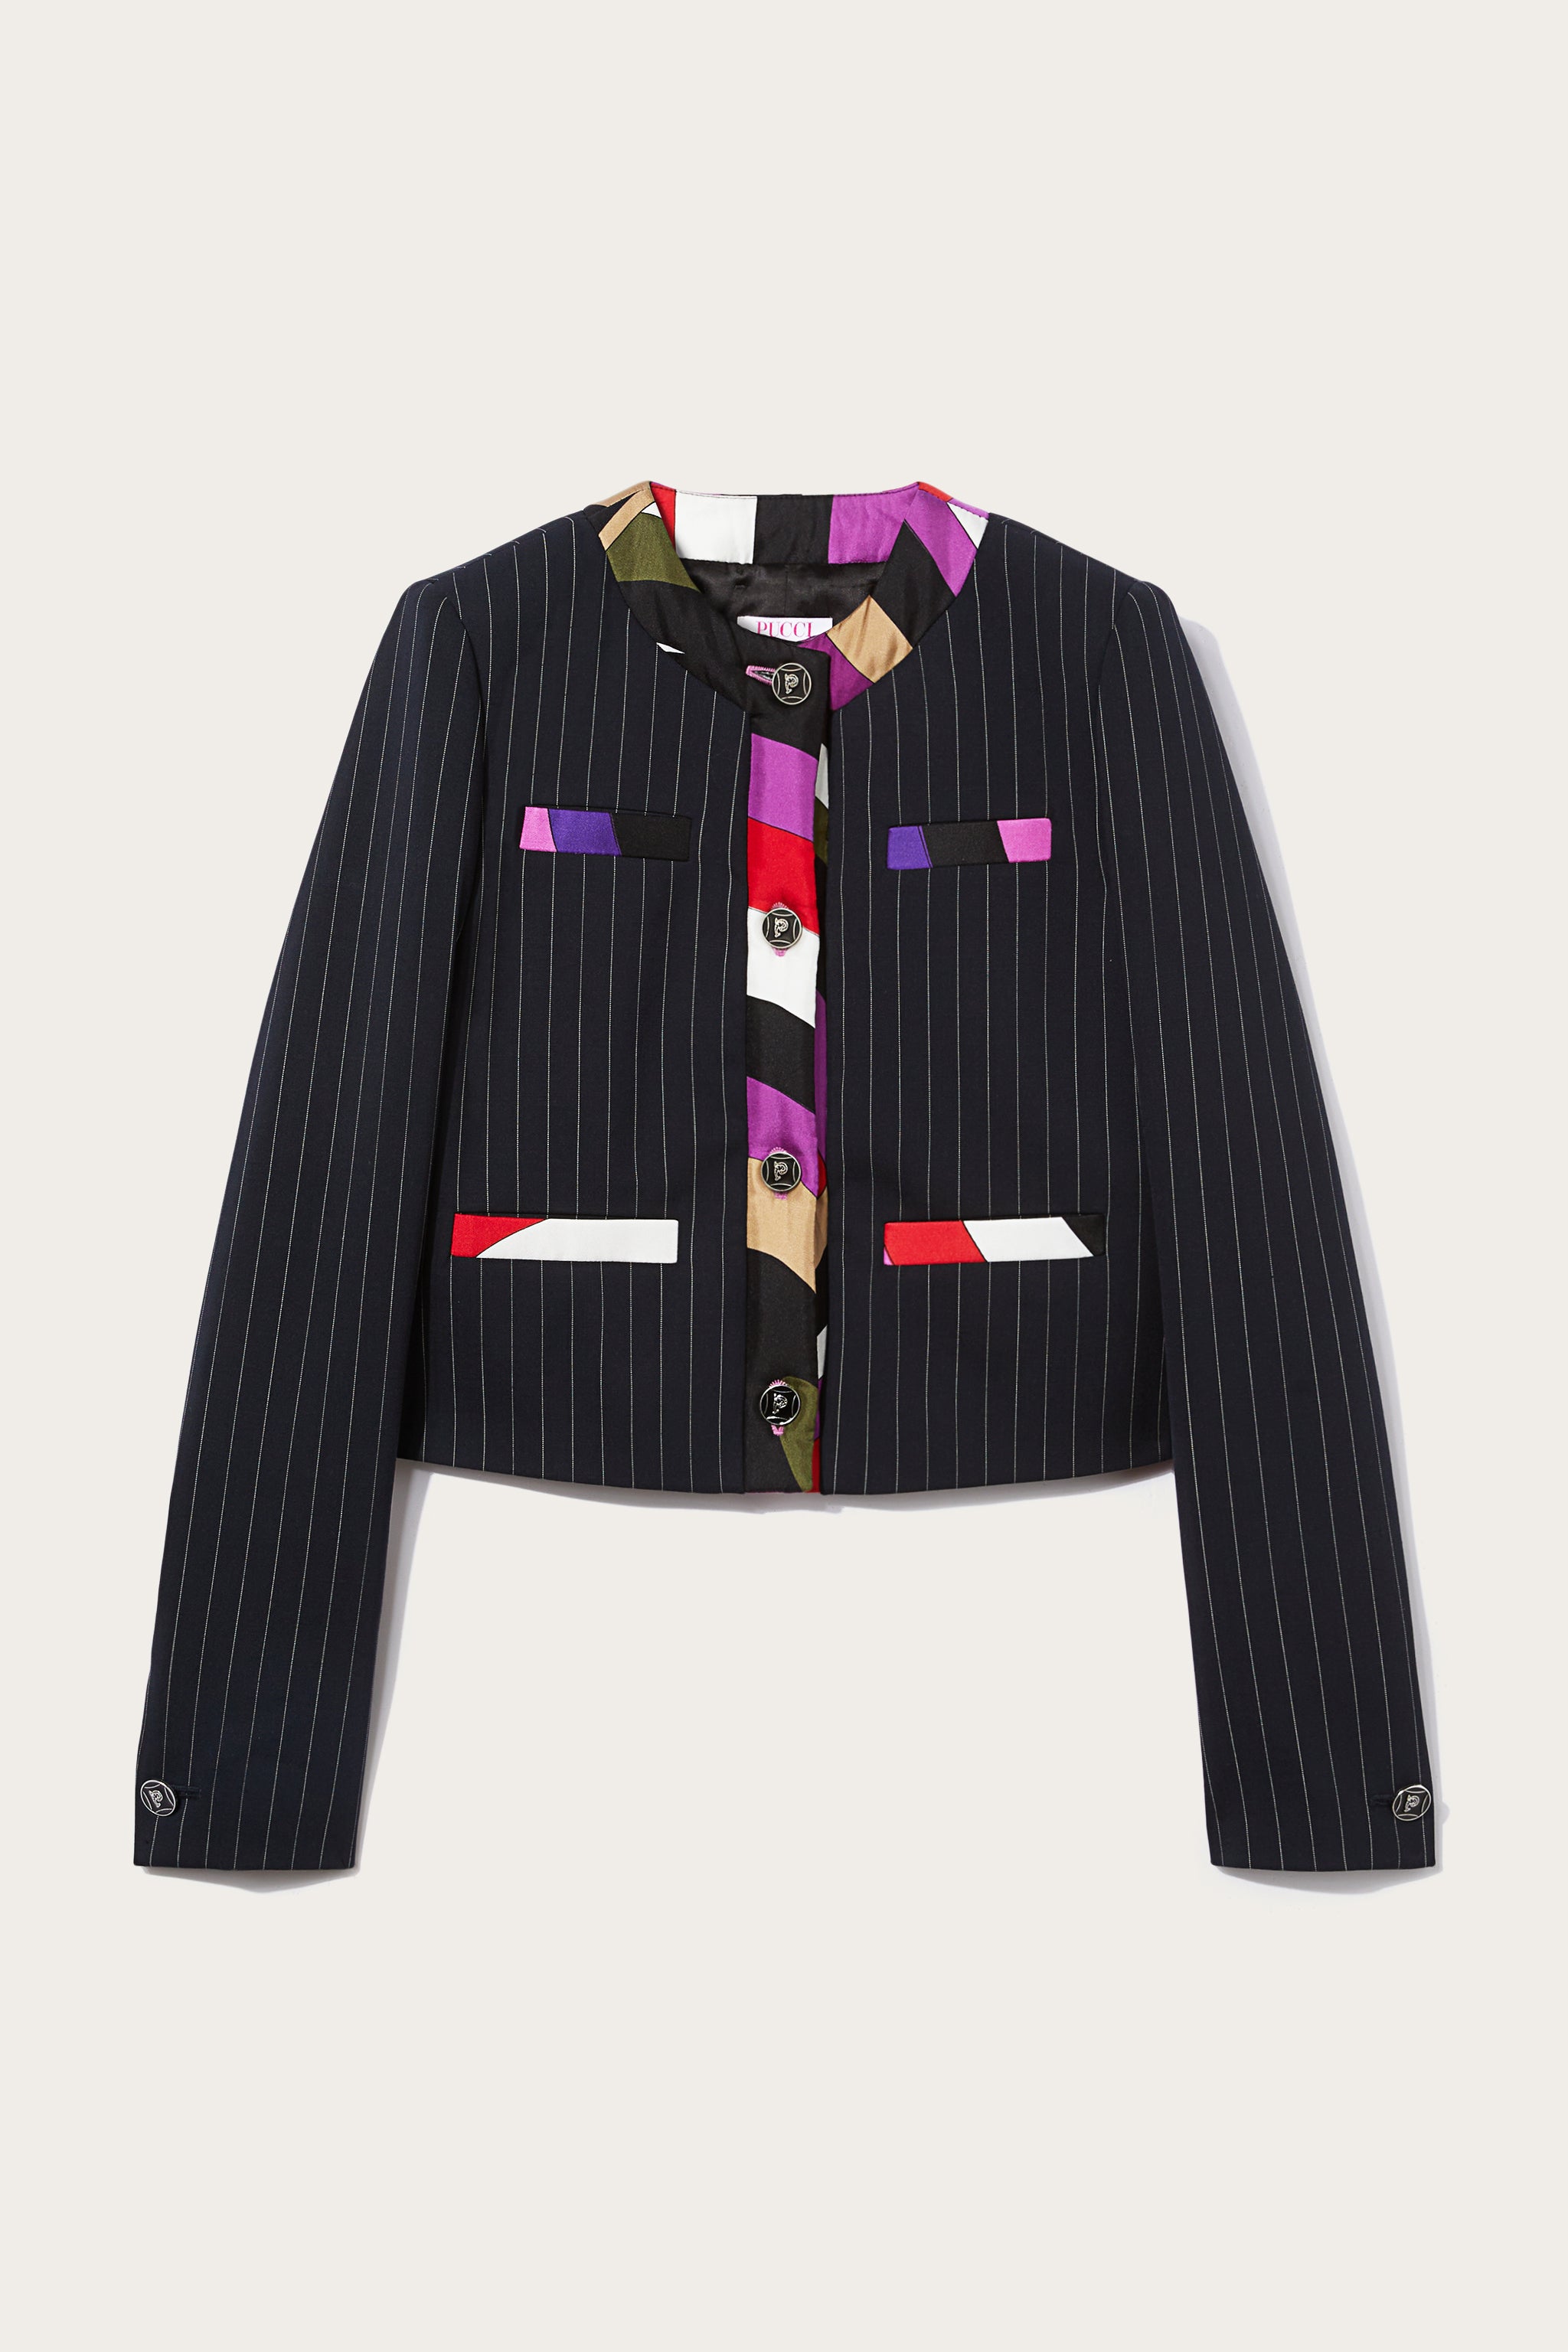 Pucci jackets collection | Pucci